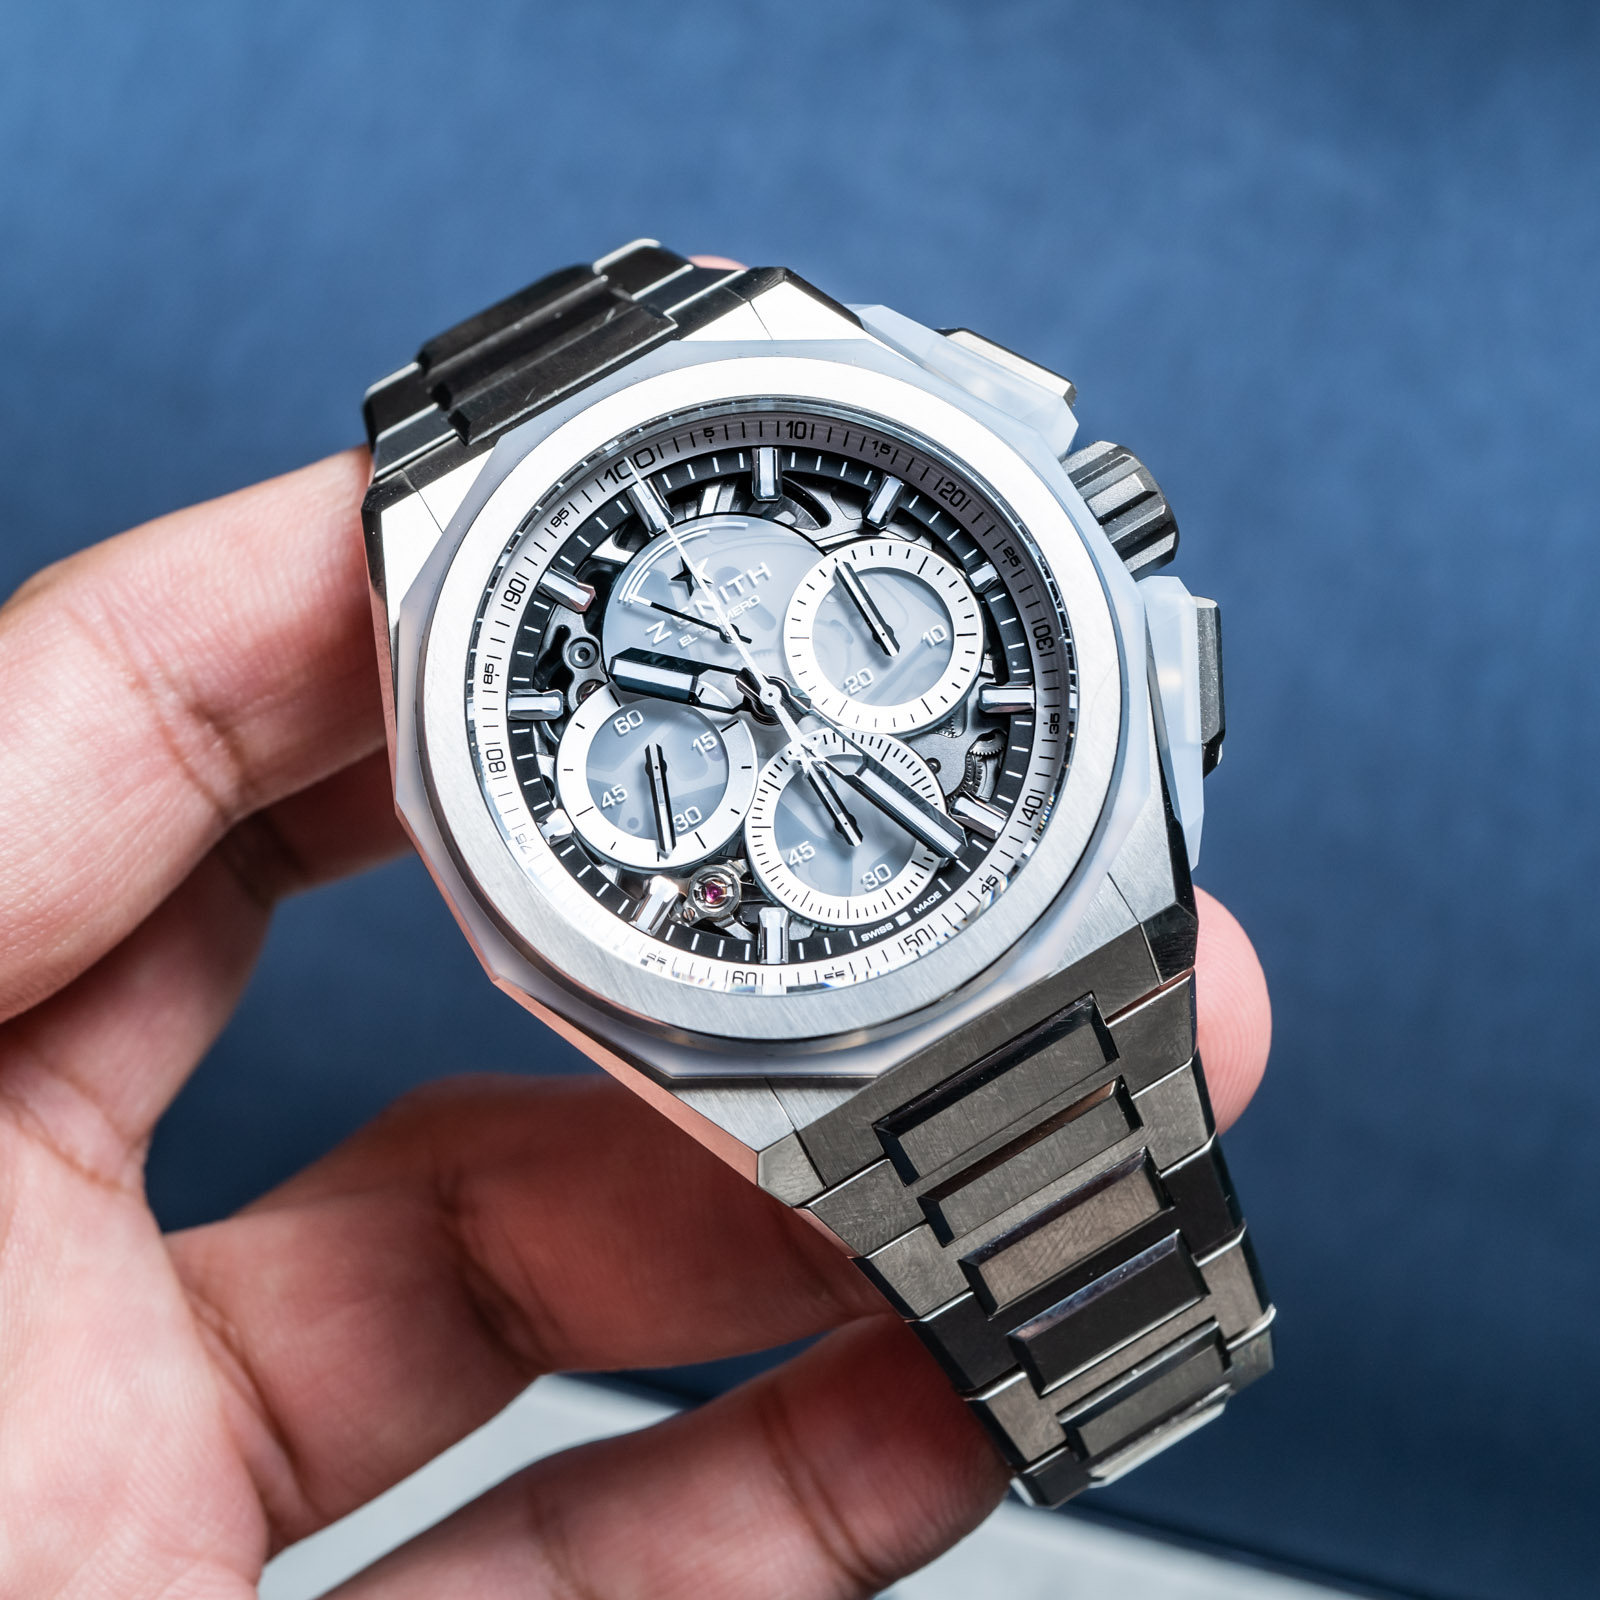 Hands-On With The All-New Zenith Defy Skyline